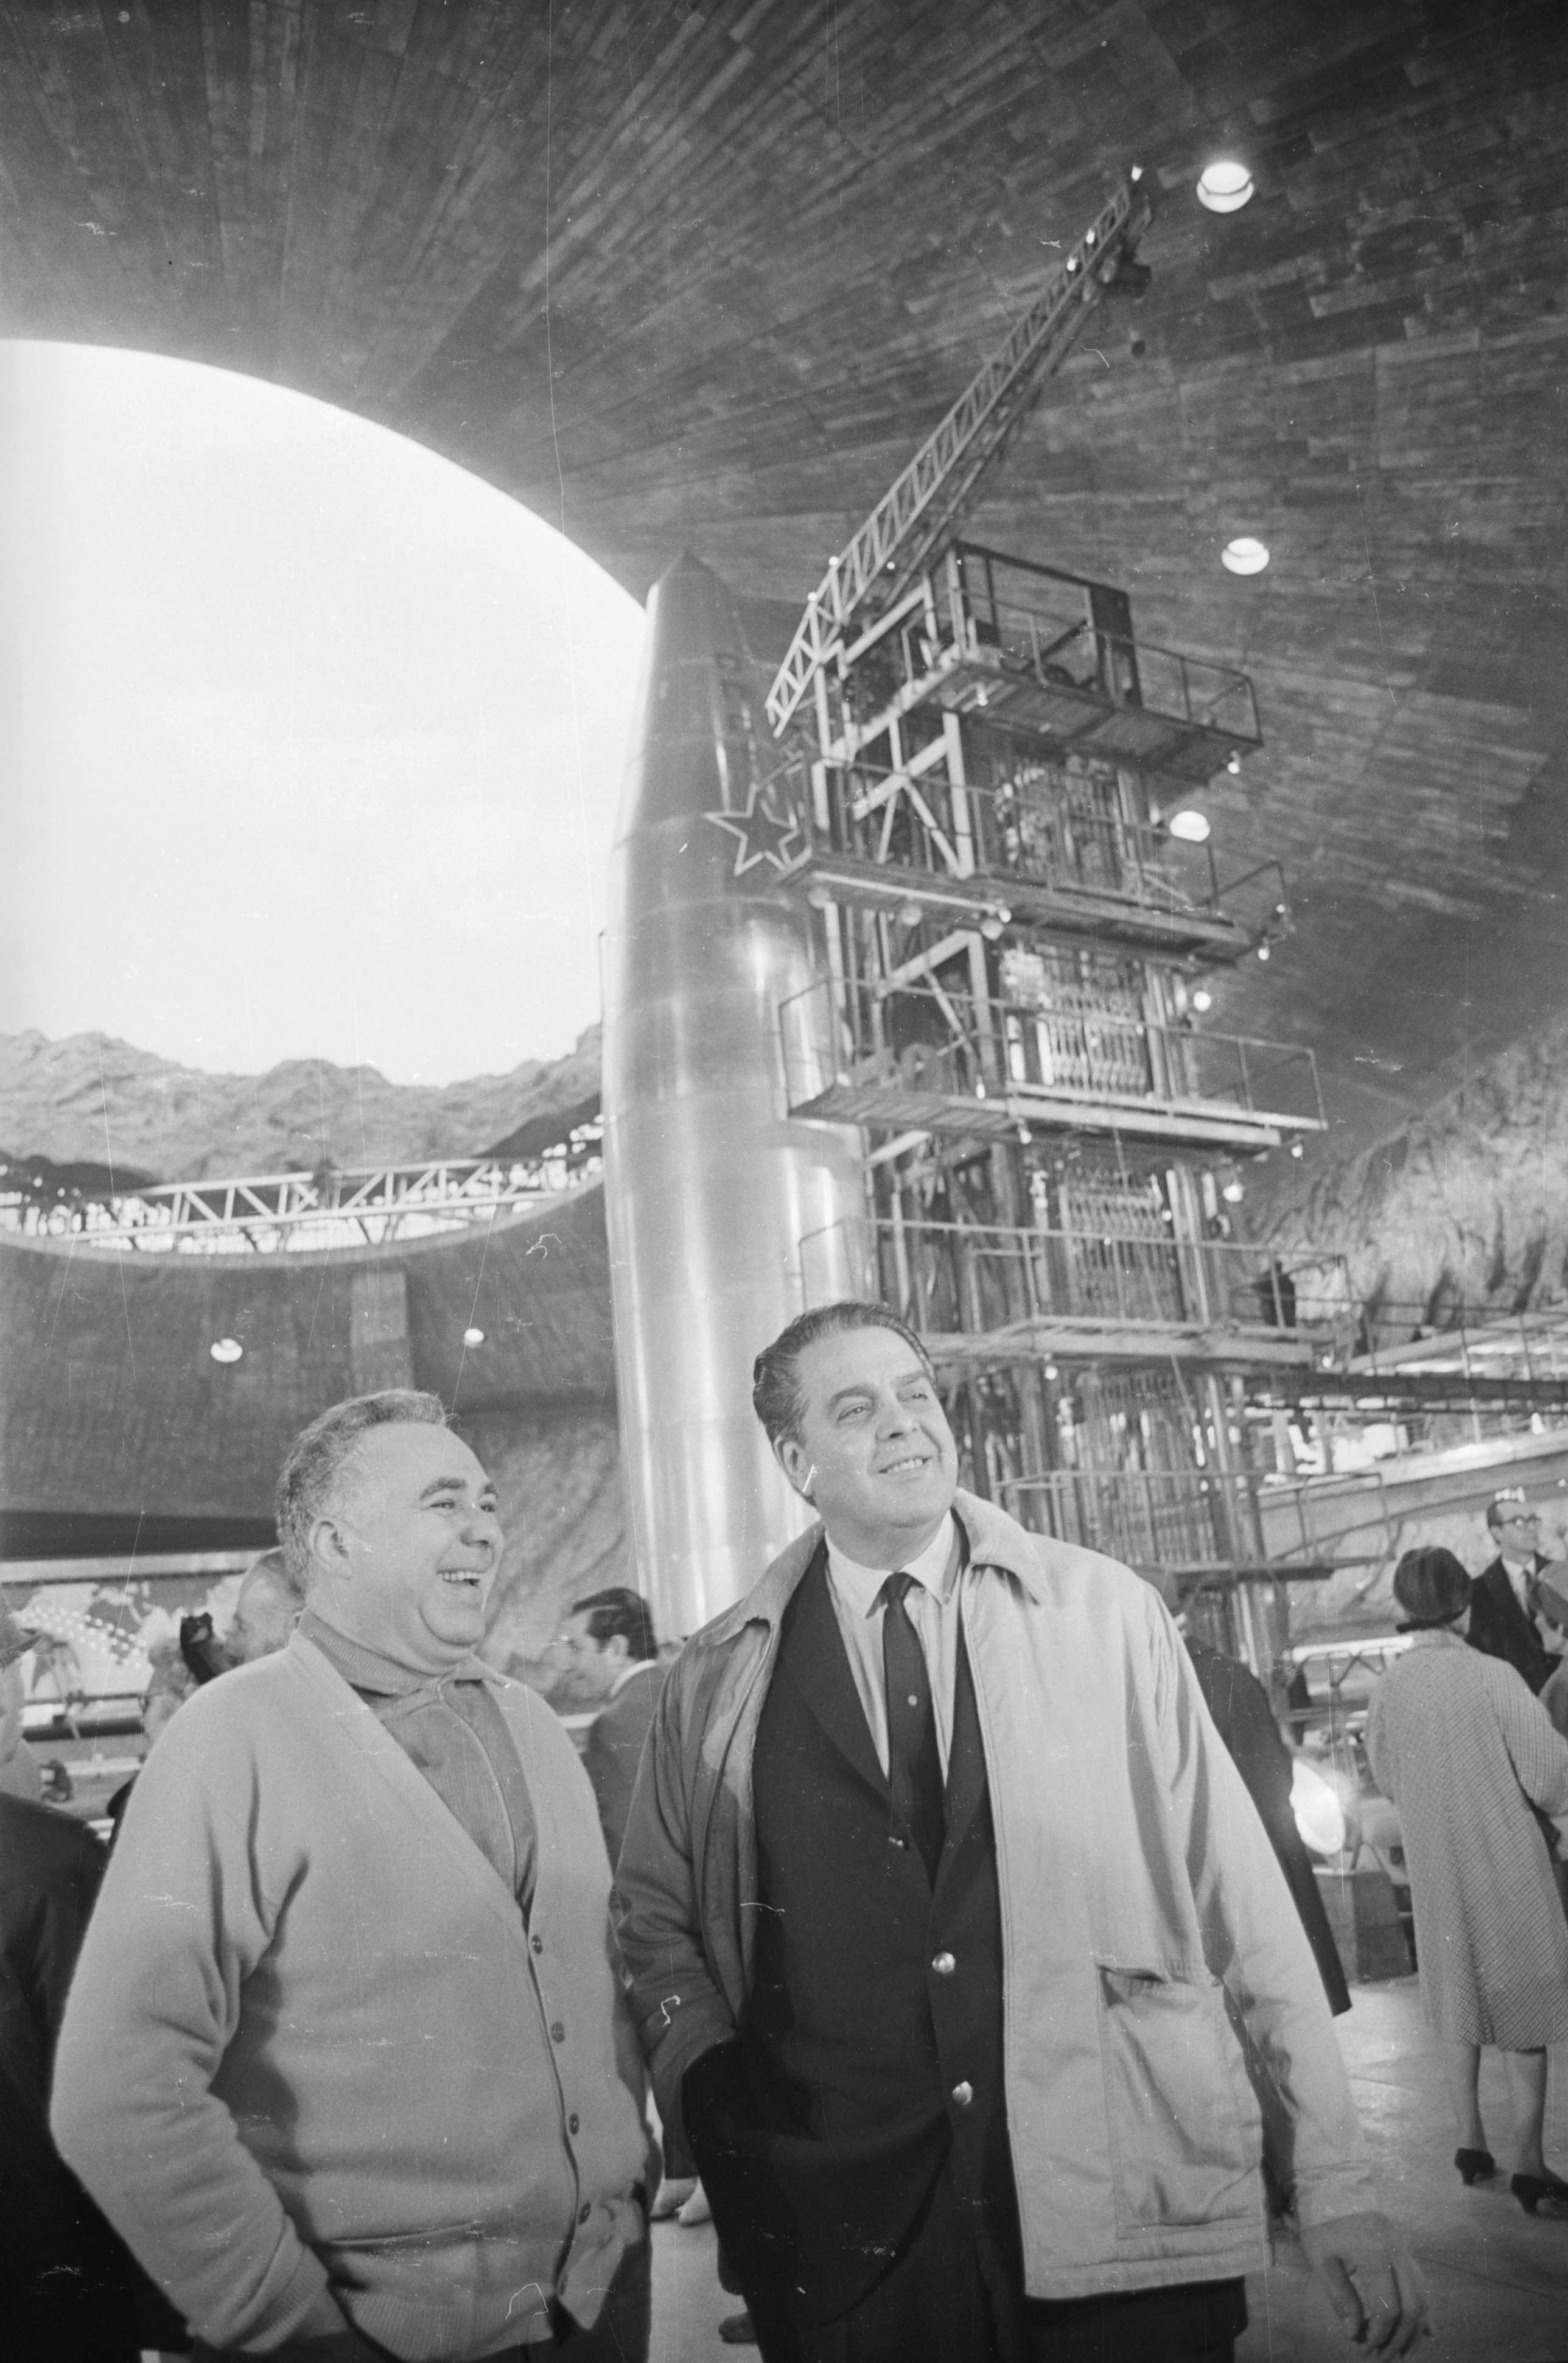 28th October 1966: Co-producers Harry Saltzman (1915 - 1994, left) and Albert Broccoli (1909 - 1996) on the massive purpose-built Pinewood set of the new Bond film 'You Only Live Twice', directed by Lewis Gilbert. (Photo by Larry Ellis/Express/Getty Images)